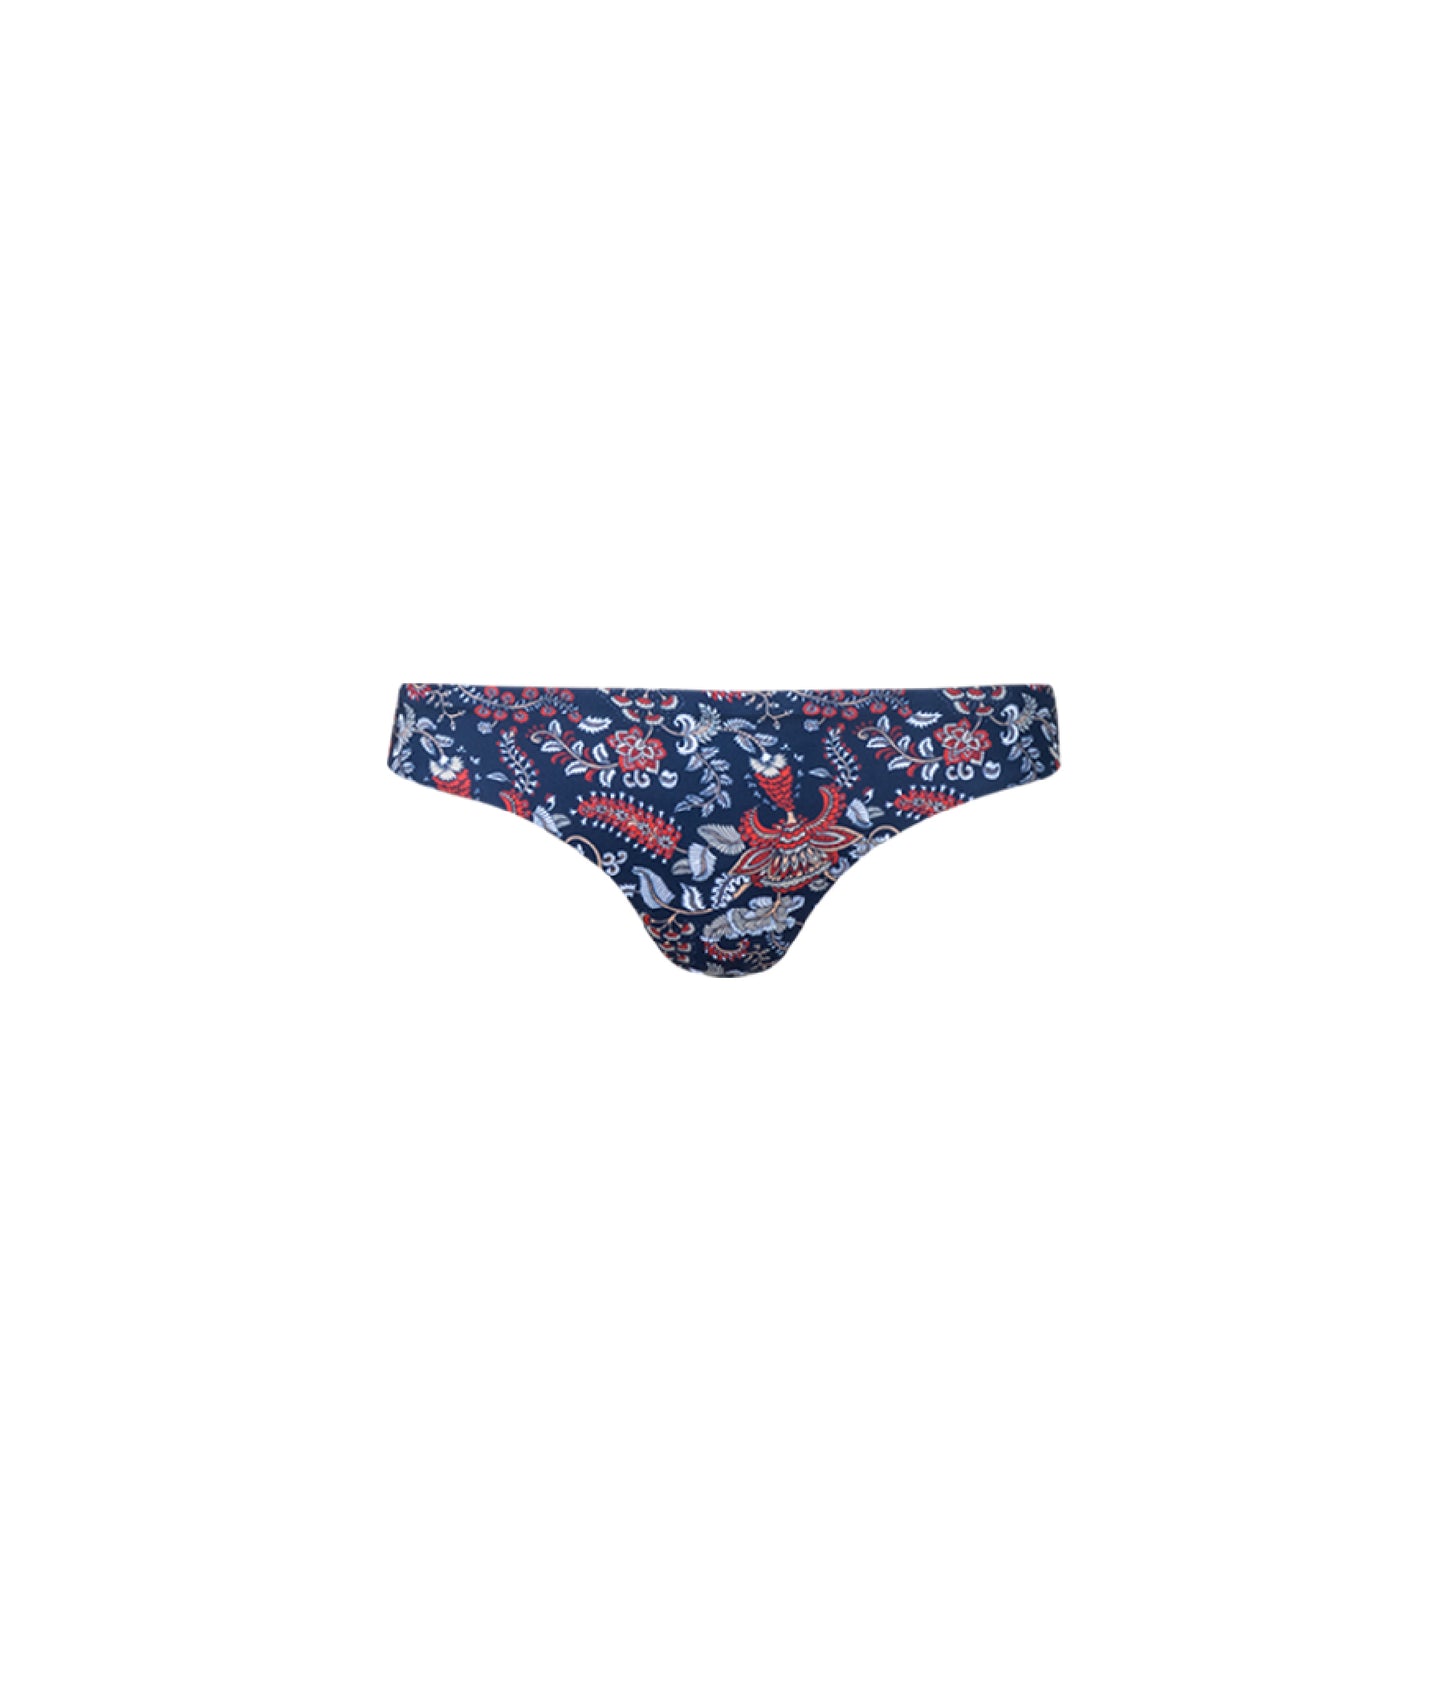 Load image into Gallery viewer, Verdelimon - Bikini Bottom - Tunas - Printed - Blue Floral - Front
